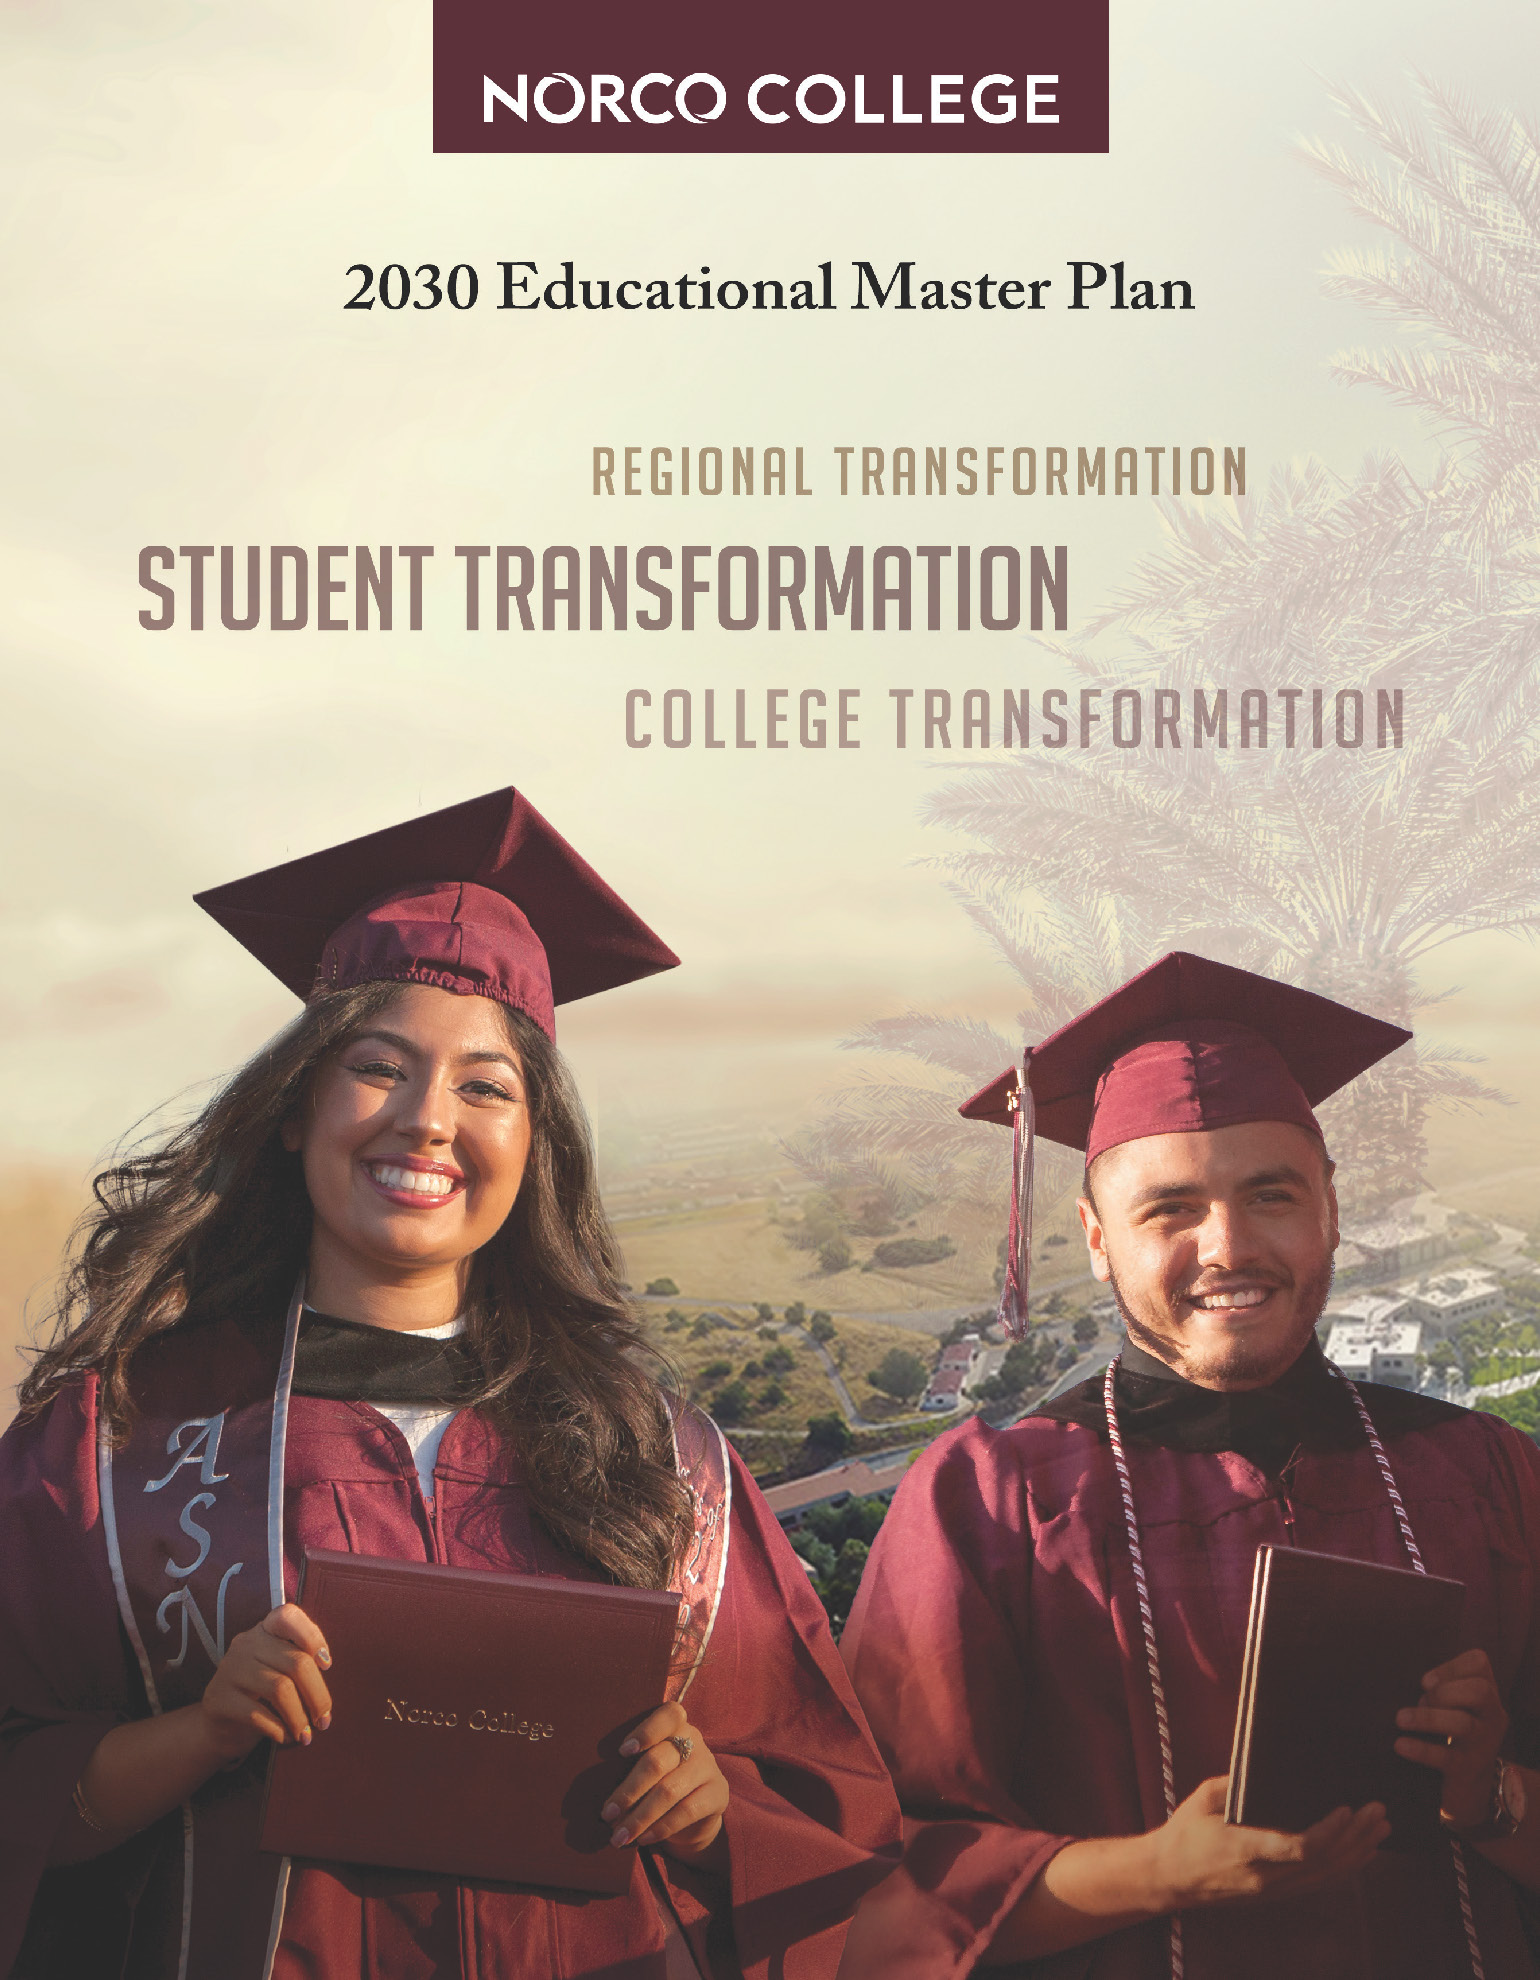 Norco College 2030 Educational Master Plan